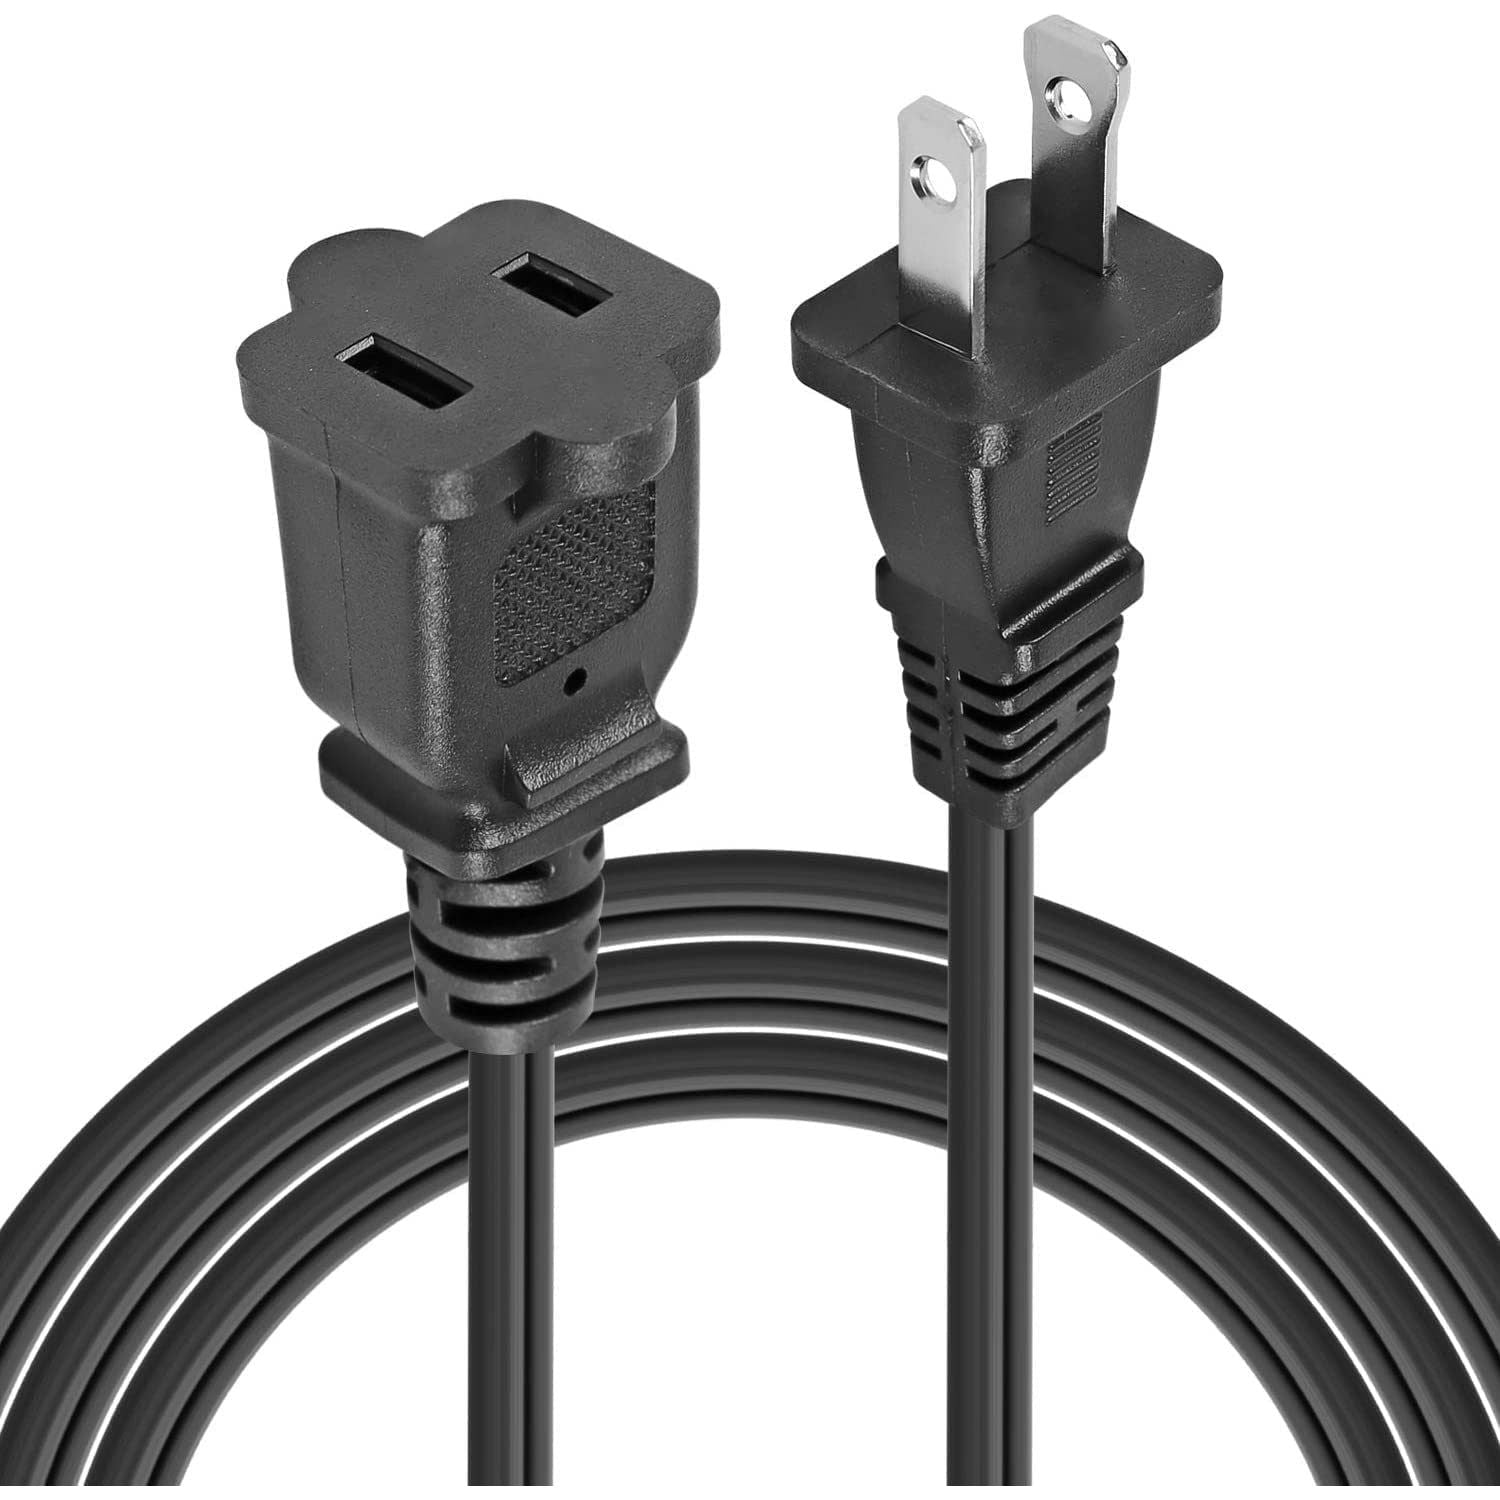 2-Prong Male-Female Extension Power Cord Cable; Outlet Extension Cable Cord US AC 2-Prong Male-Female Power Cable 13A/125V; Black 5 Core EXC BLK 15FT Moorescarts